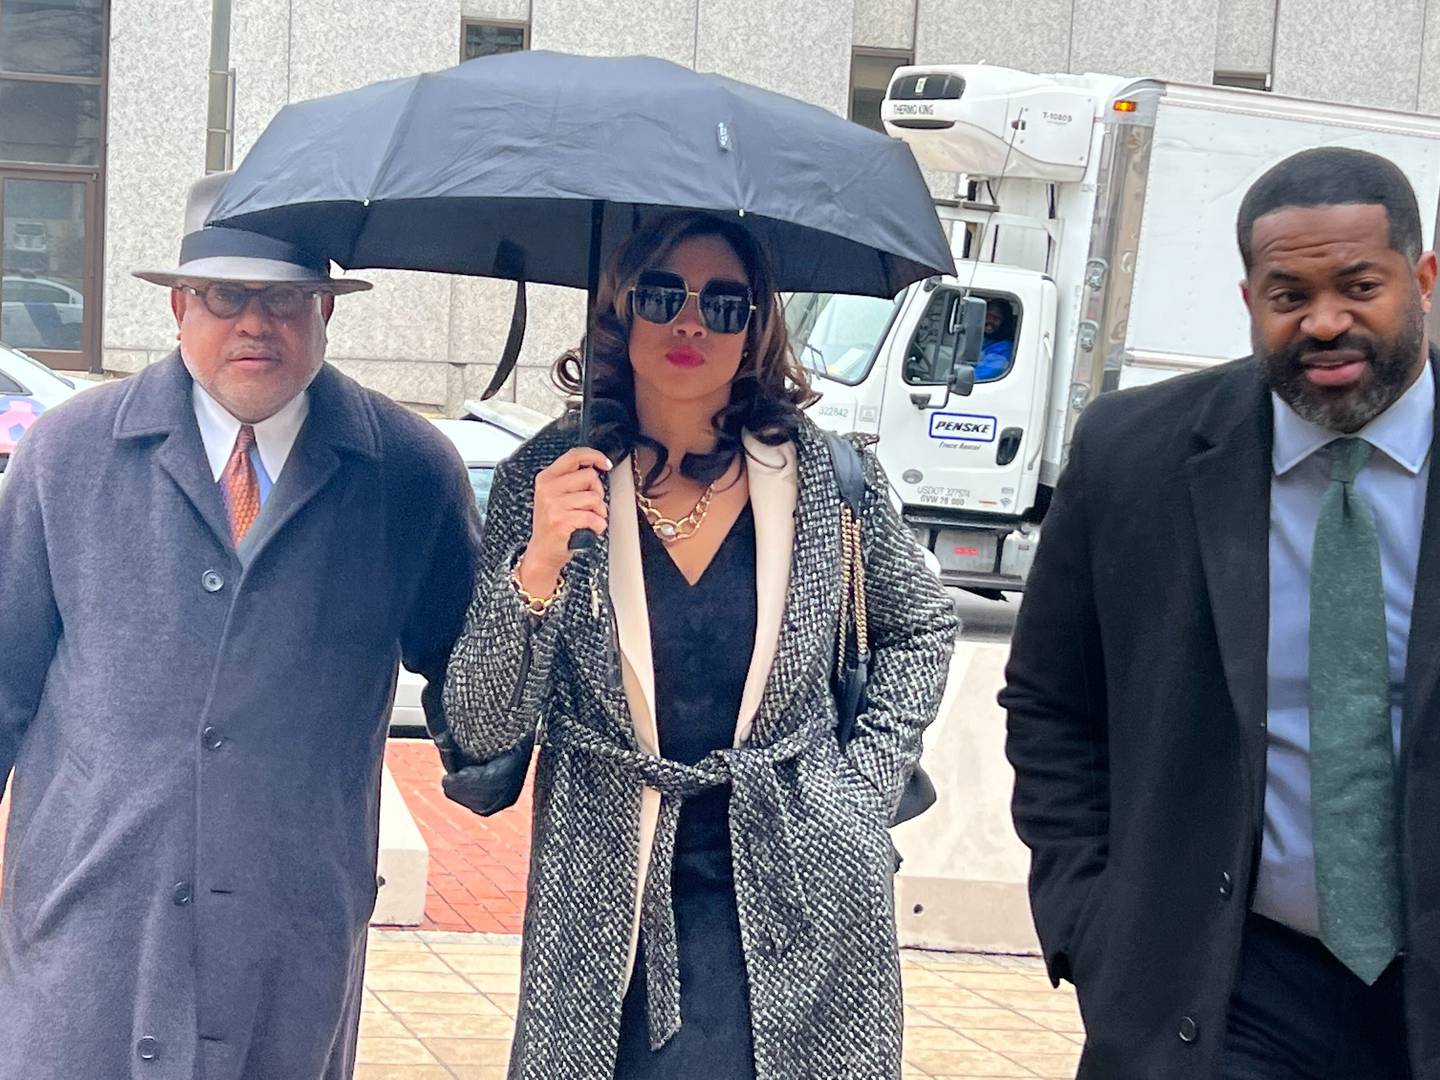 Former Baltimore State's Attorney Marilyn Mosby arrives in court flanked by her attorney, A. Scott Bolden, left, and husband, City Council President Nick Mosby.